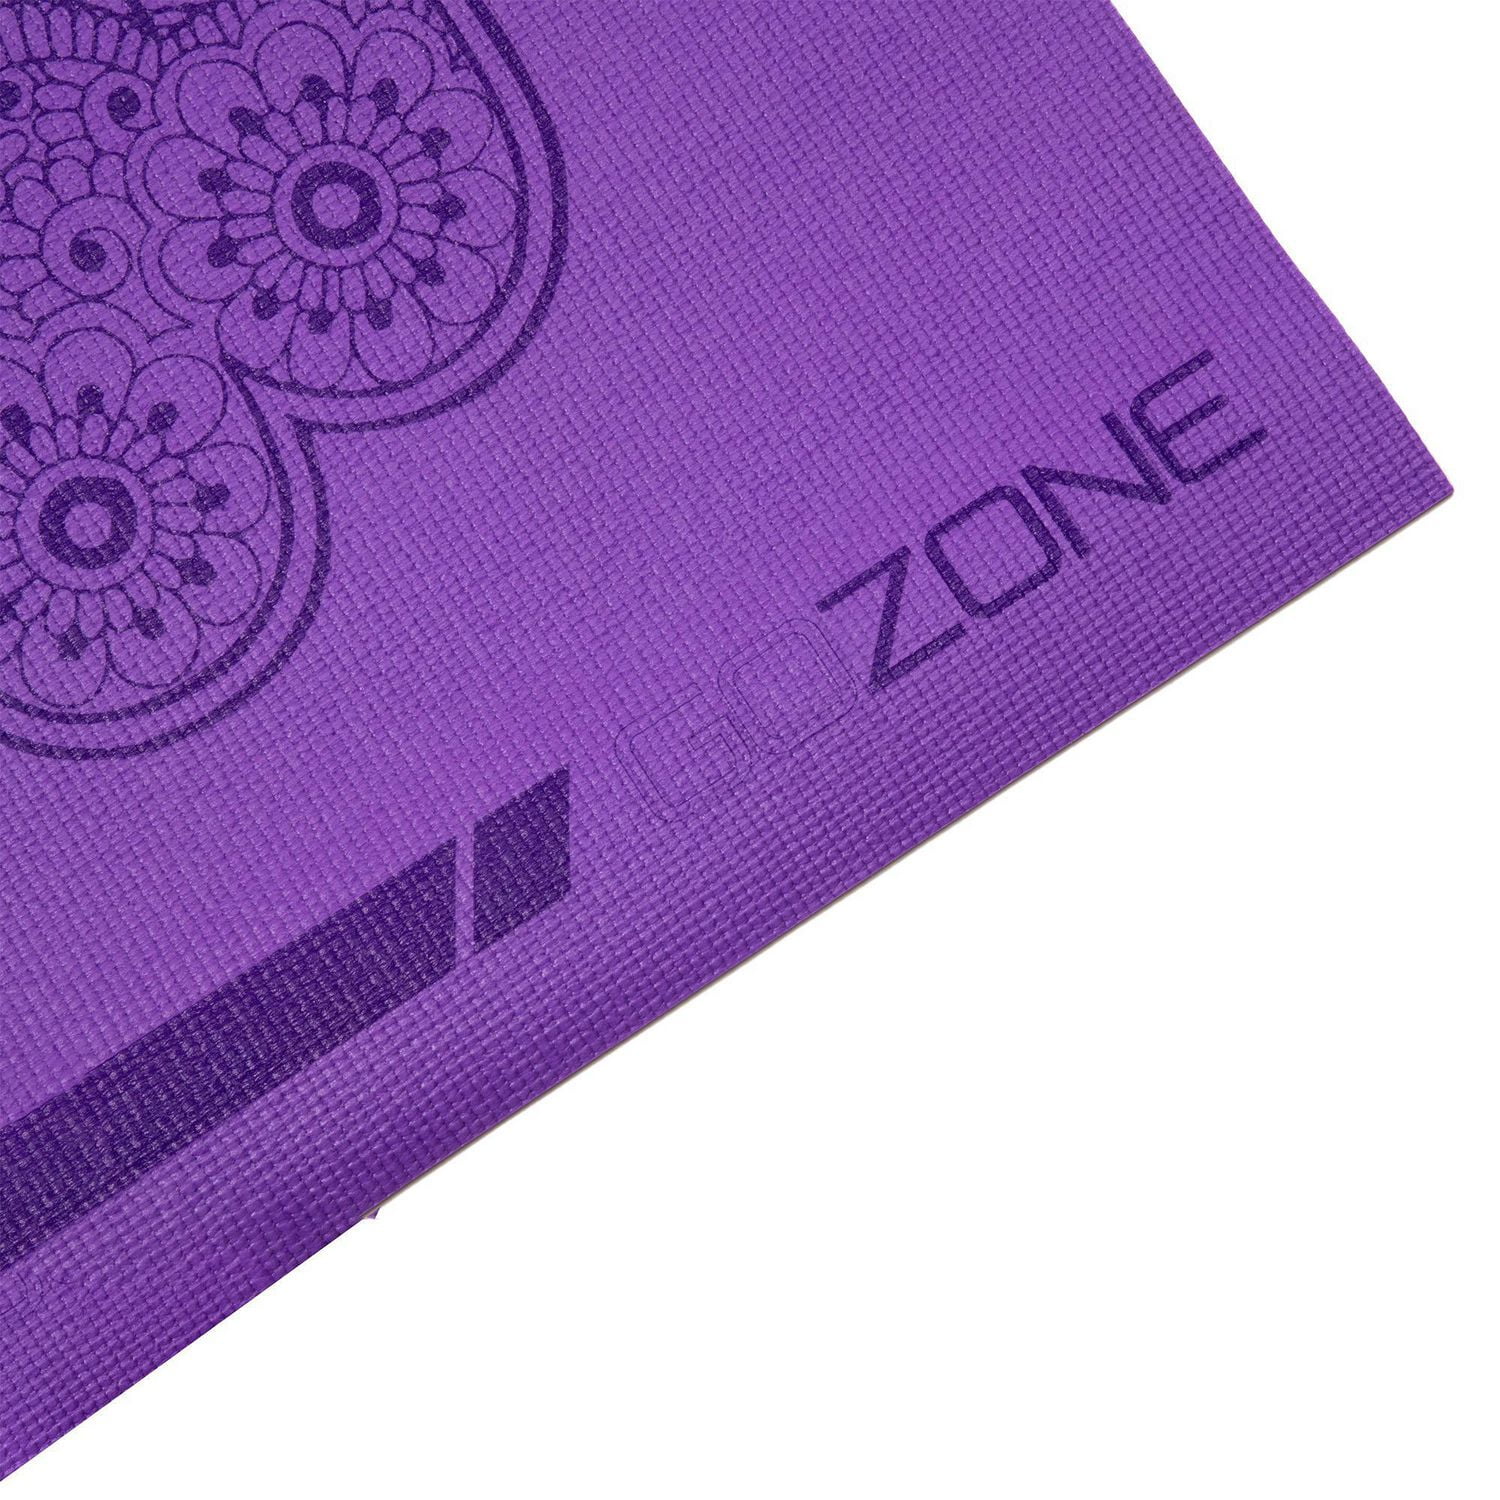 Rolled Purple Yoga Mat And Clear Plastic Water Bottle On A Wooden Surface  With Natural Light Genderneutral Fitness Yoga And Exercise Props At Home Or  Gym Banner With Copy Space Active Lifestyle